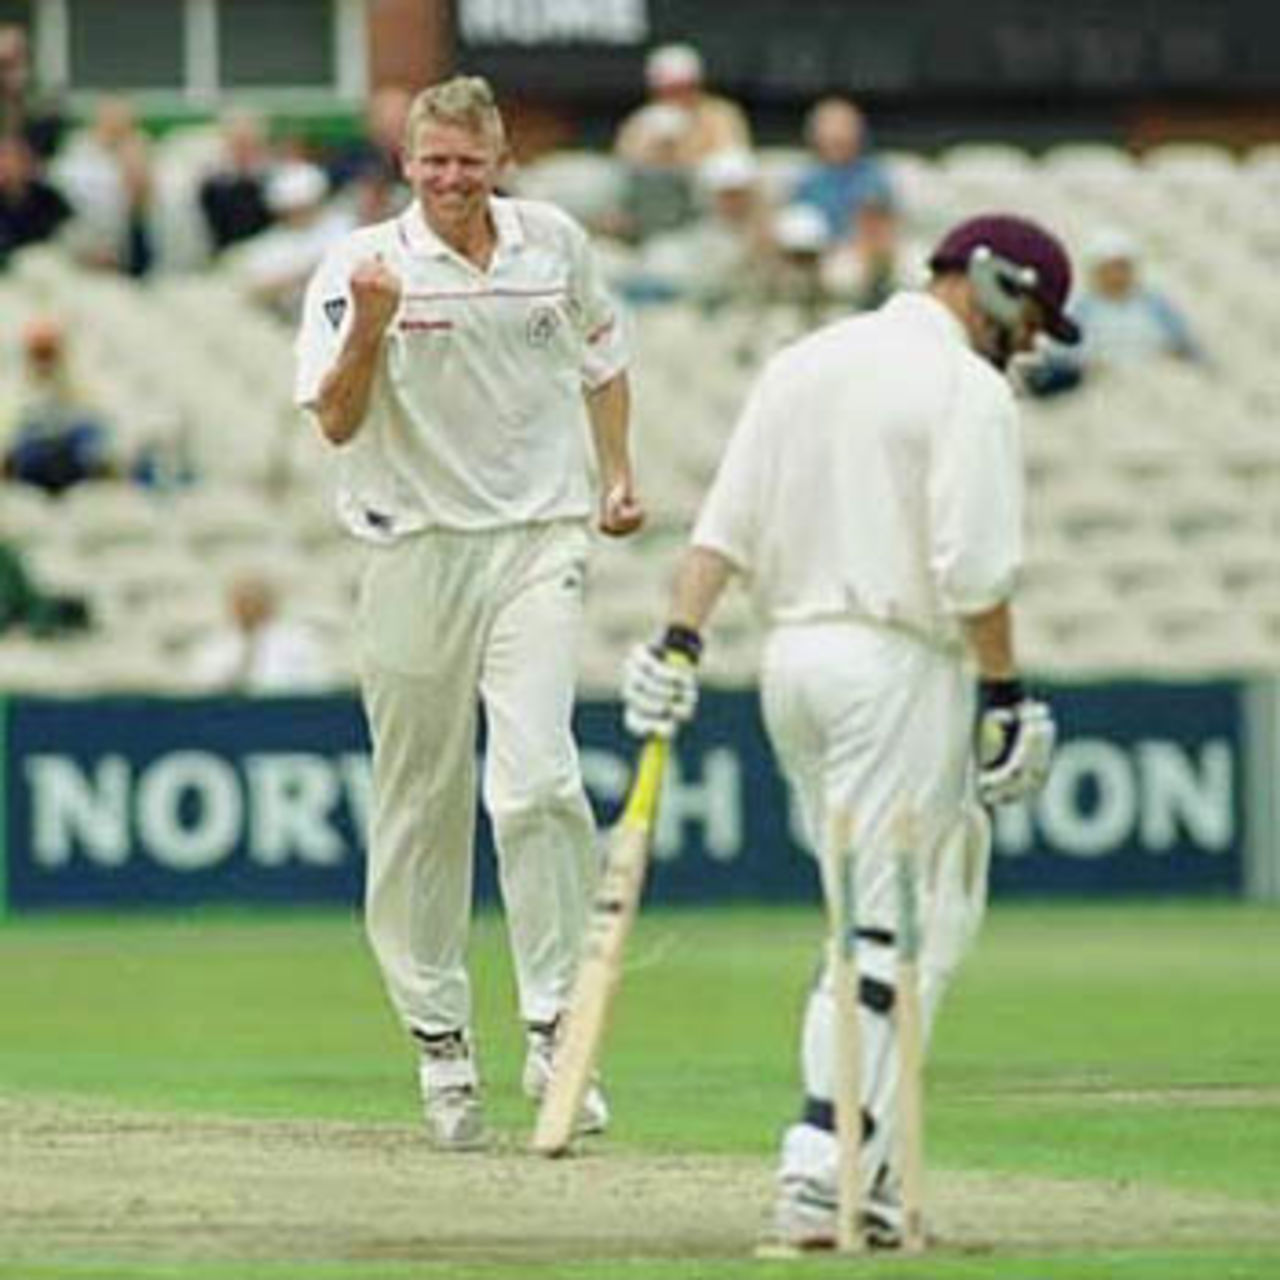 Peter Martin celebrates the dismissal of Mark Lathwell, PPP healthcare County Championship Division One, 2000, Lancashire v Somerset, Old Trafford, Manchester, 08-10 September 2000 (Day 1).